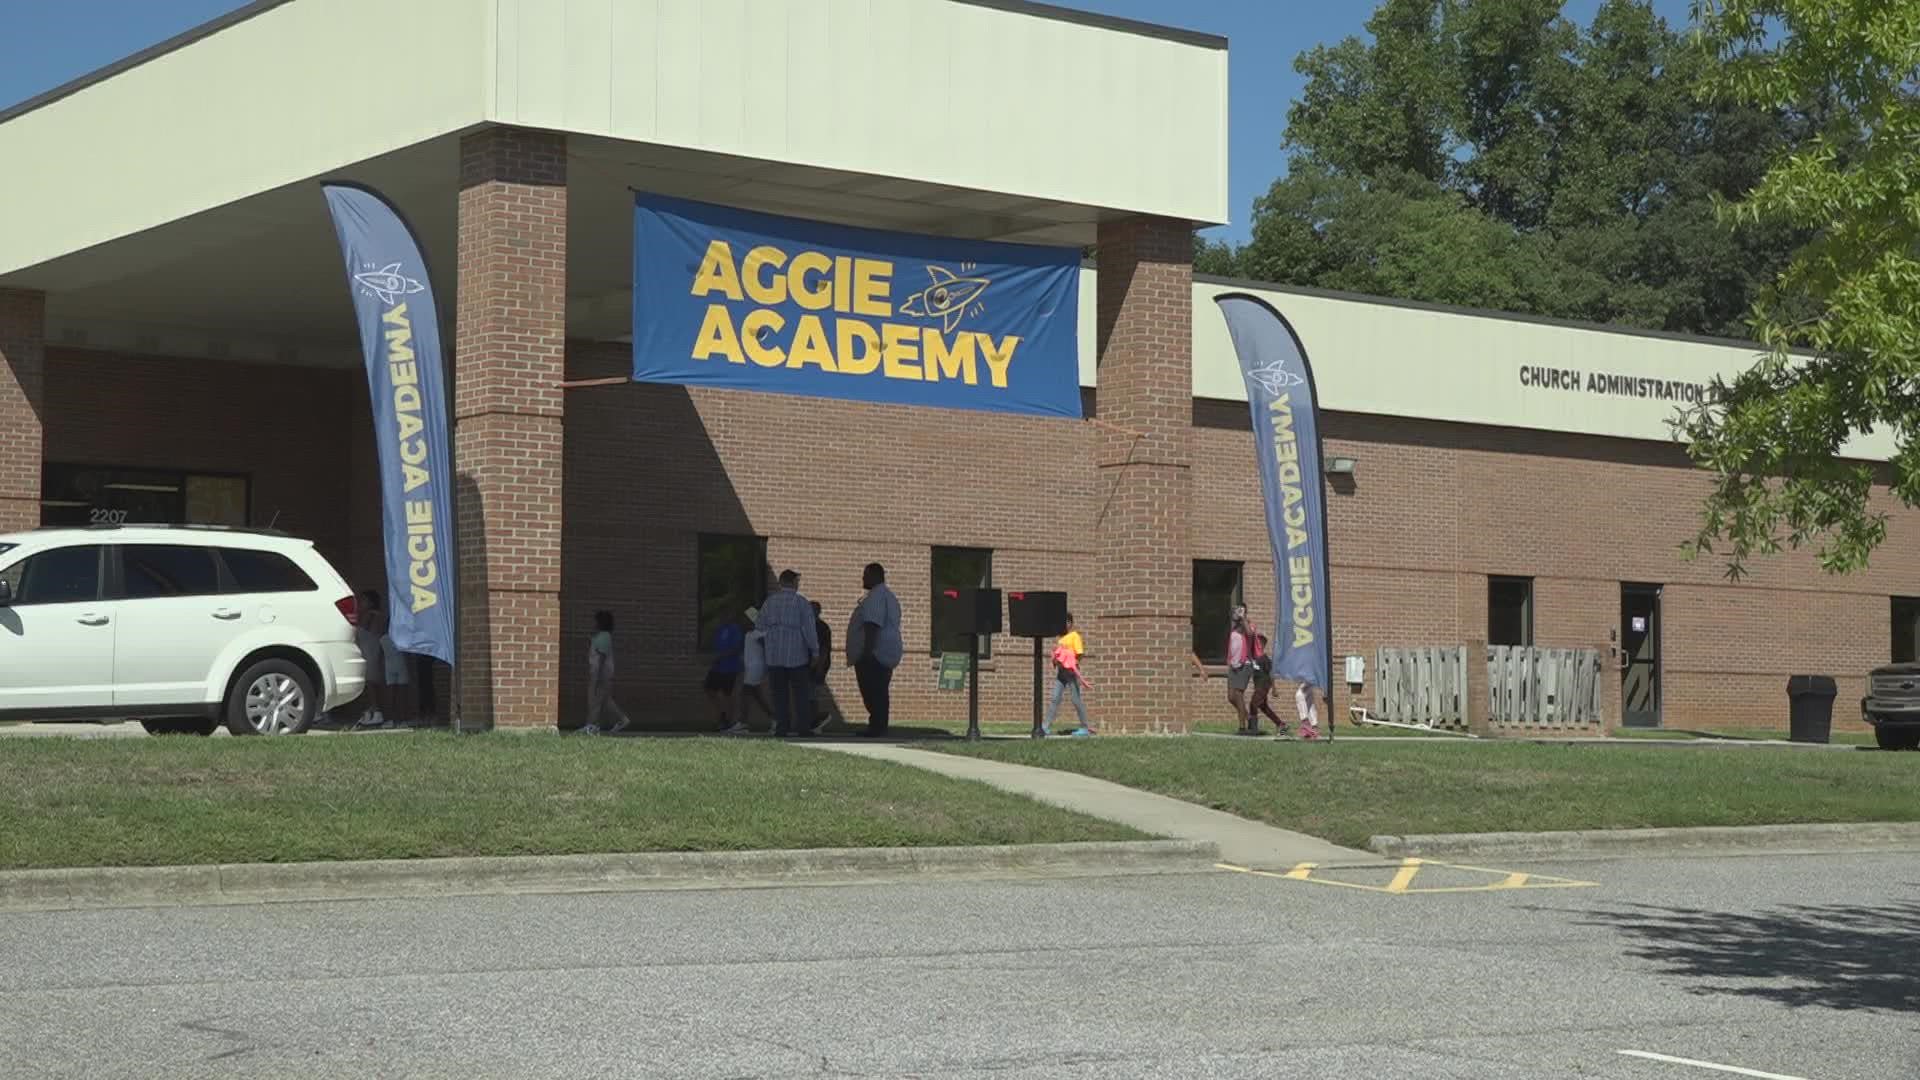 Aggie Academy gives North Carolina A&T students the chance to teach in classrooms before entering the workforce.